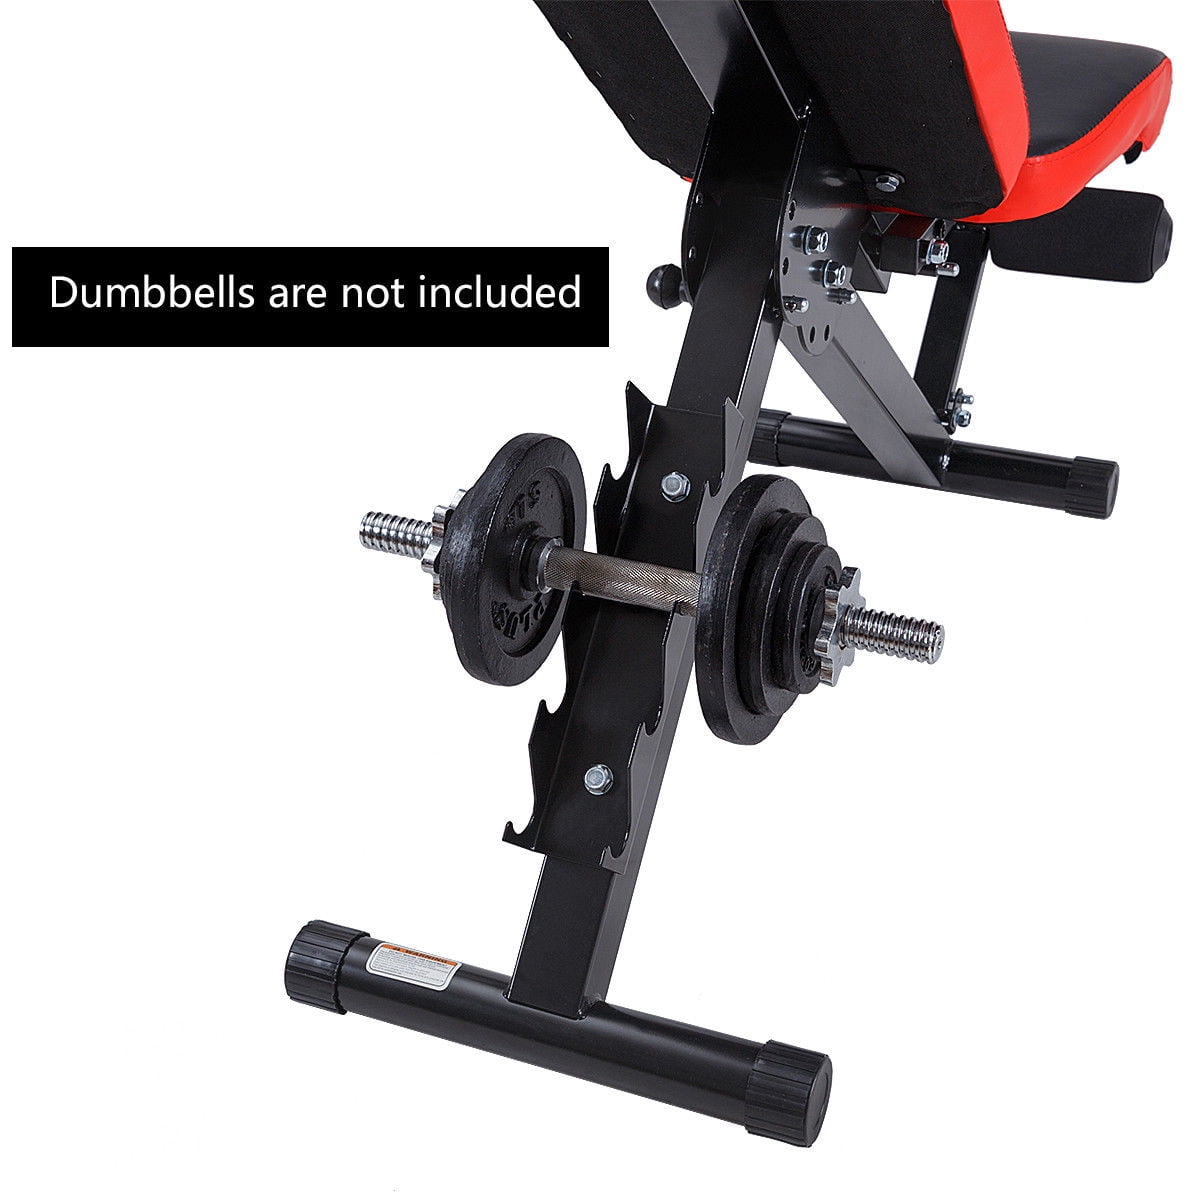 Adjustable Weight Bench Strength Workout Dumbbell Bench For Full Body Exercise